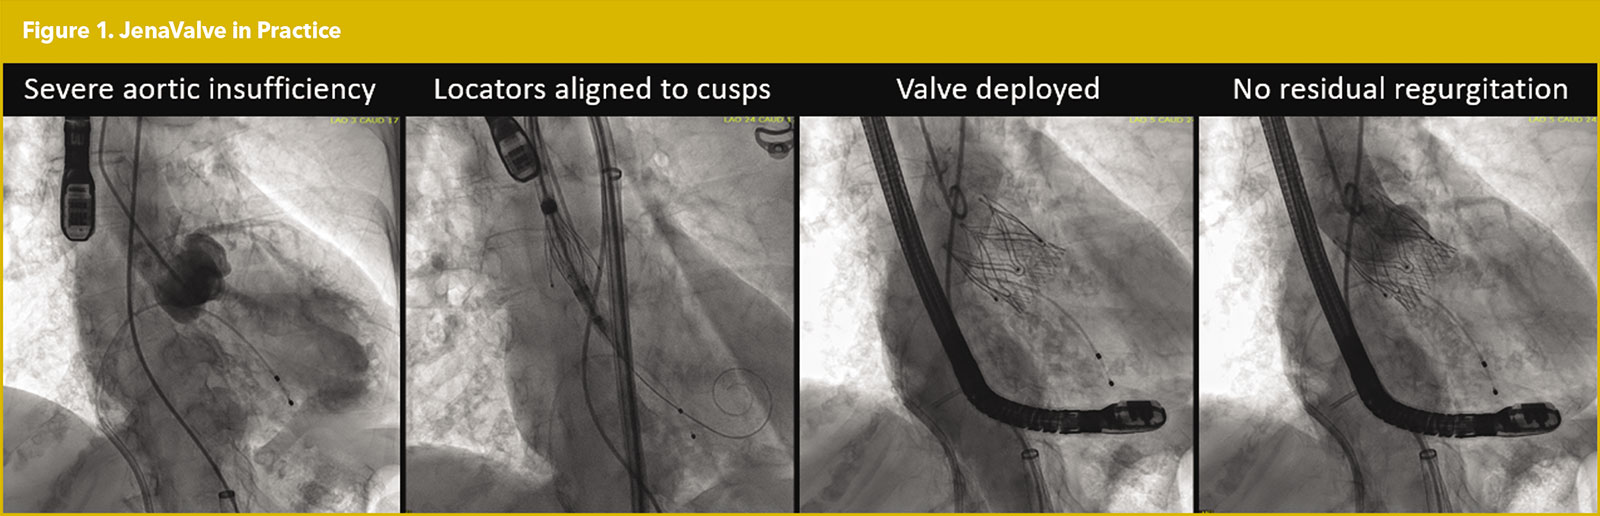 Transcatheter Aortic Valve Replacement 
For Pure Native Aortic Insufficiency